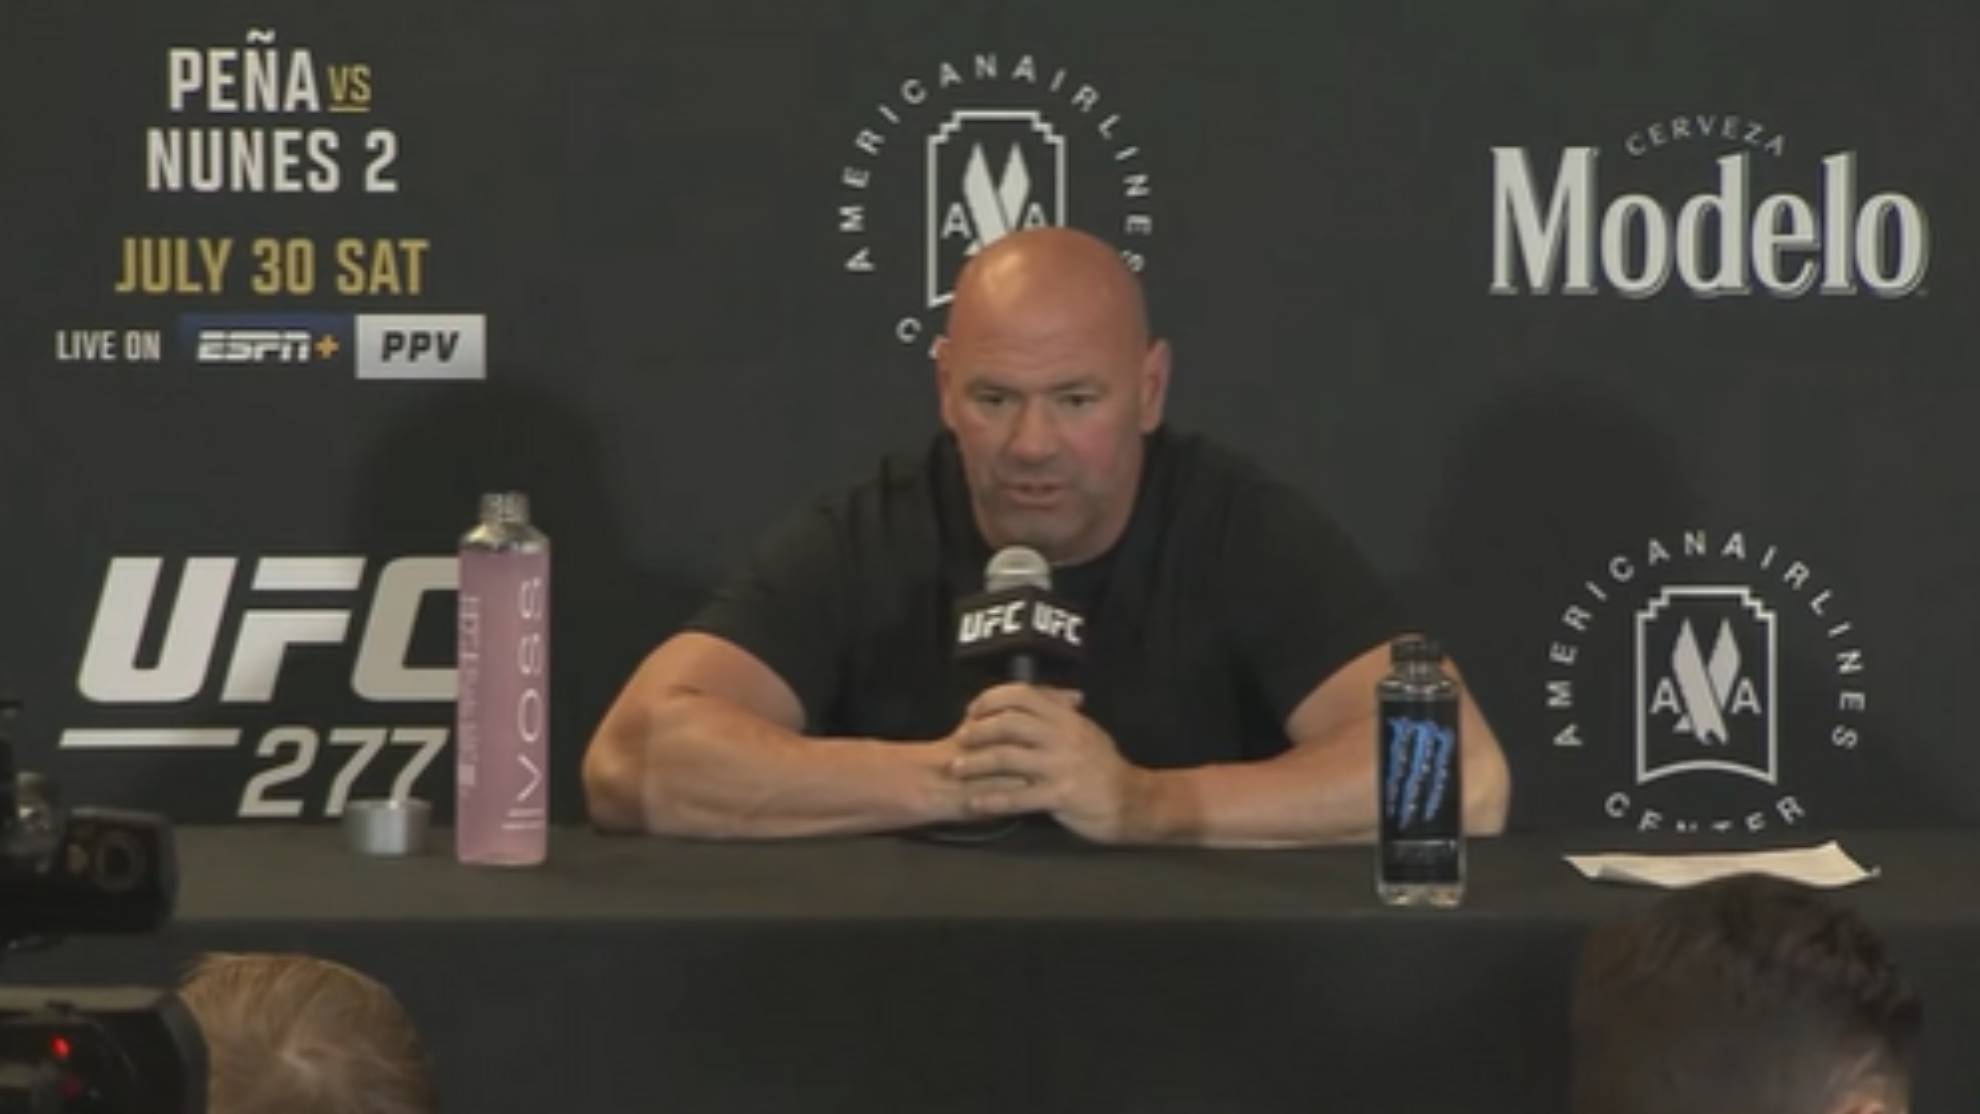 Dana White weighs in on Jake Paul's canceled fight